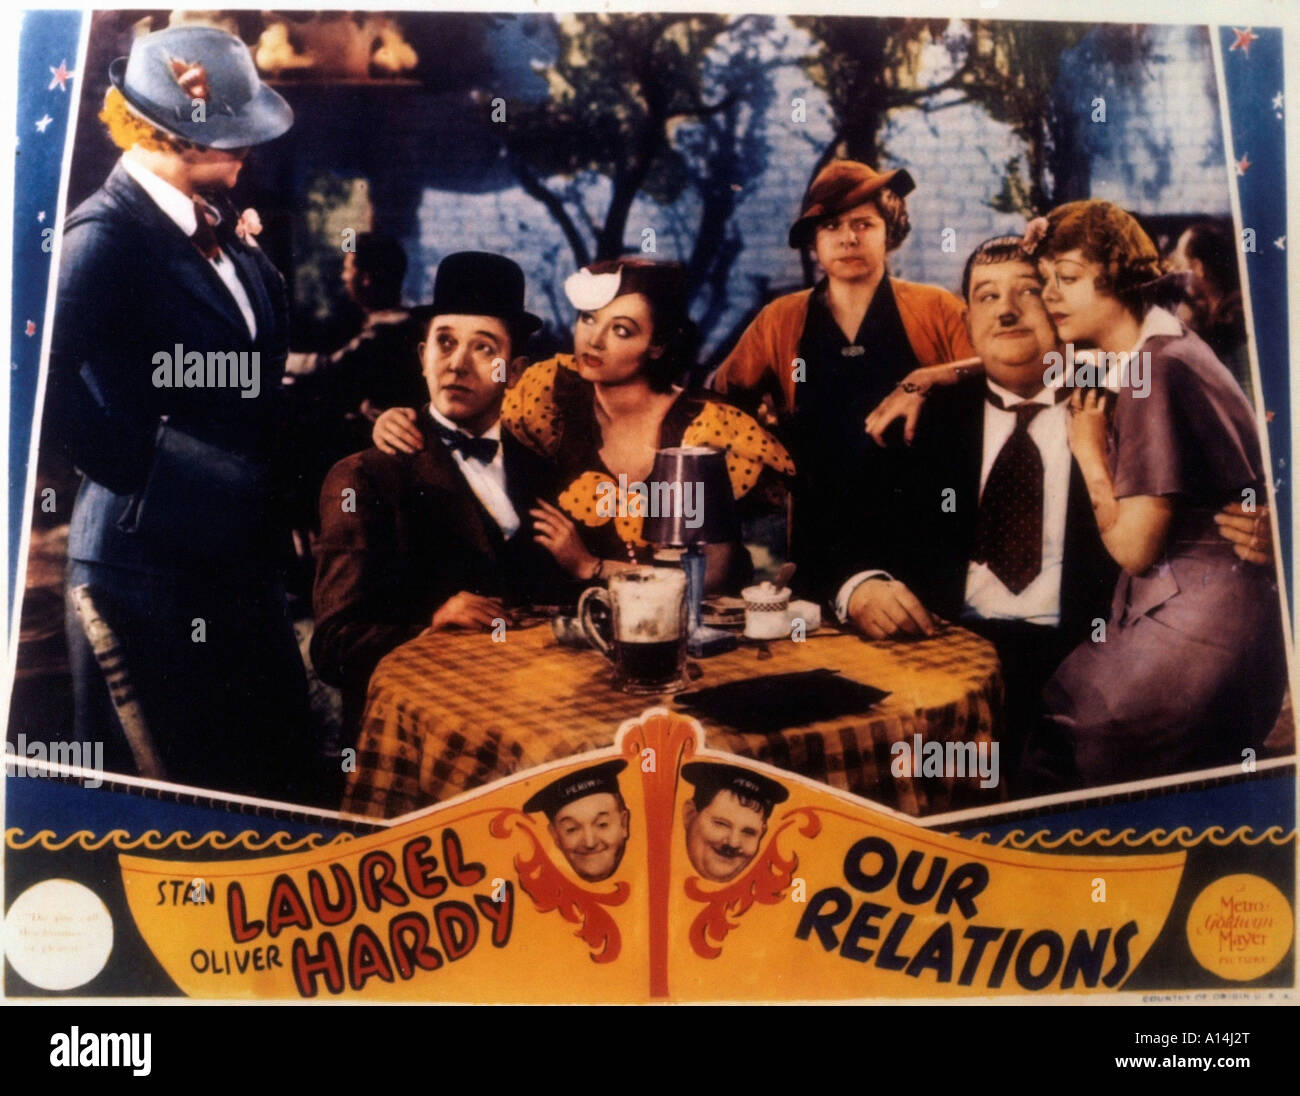 Our relations 1936 Harry Lachman Stan Laurel Oliver Hardy Betty Healy Daphne Pollard Iris Adrian Lona André Stock Photo